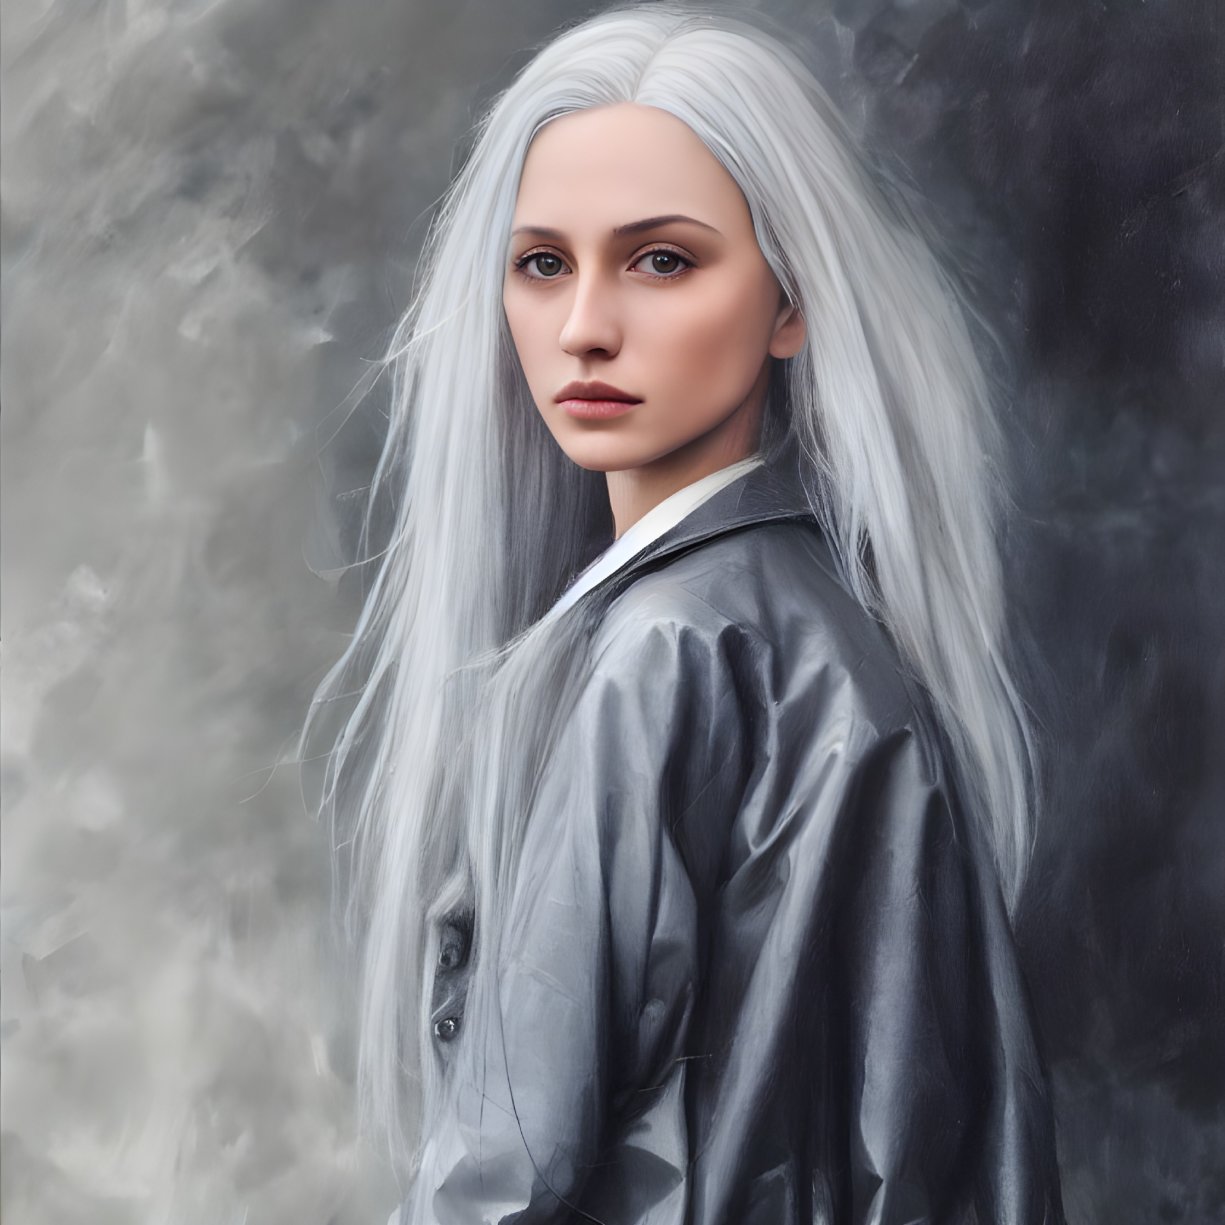 Digital portrait: Woman with silver hair and blue eyes in gray coat on smoky background